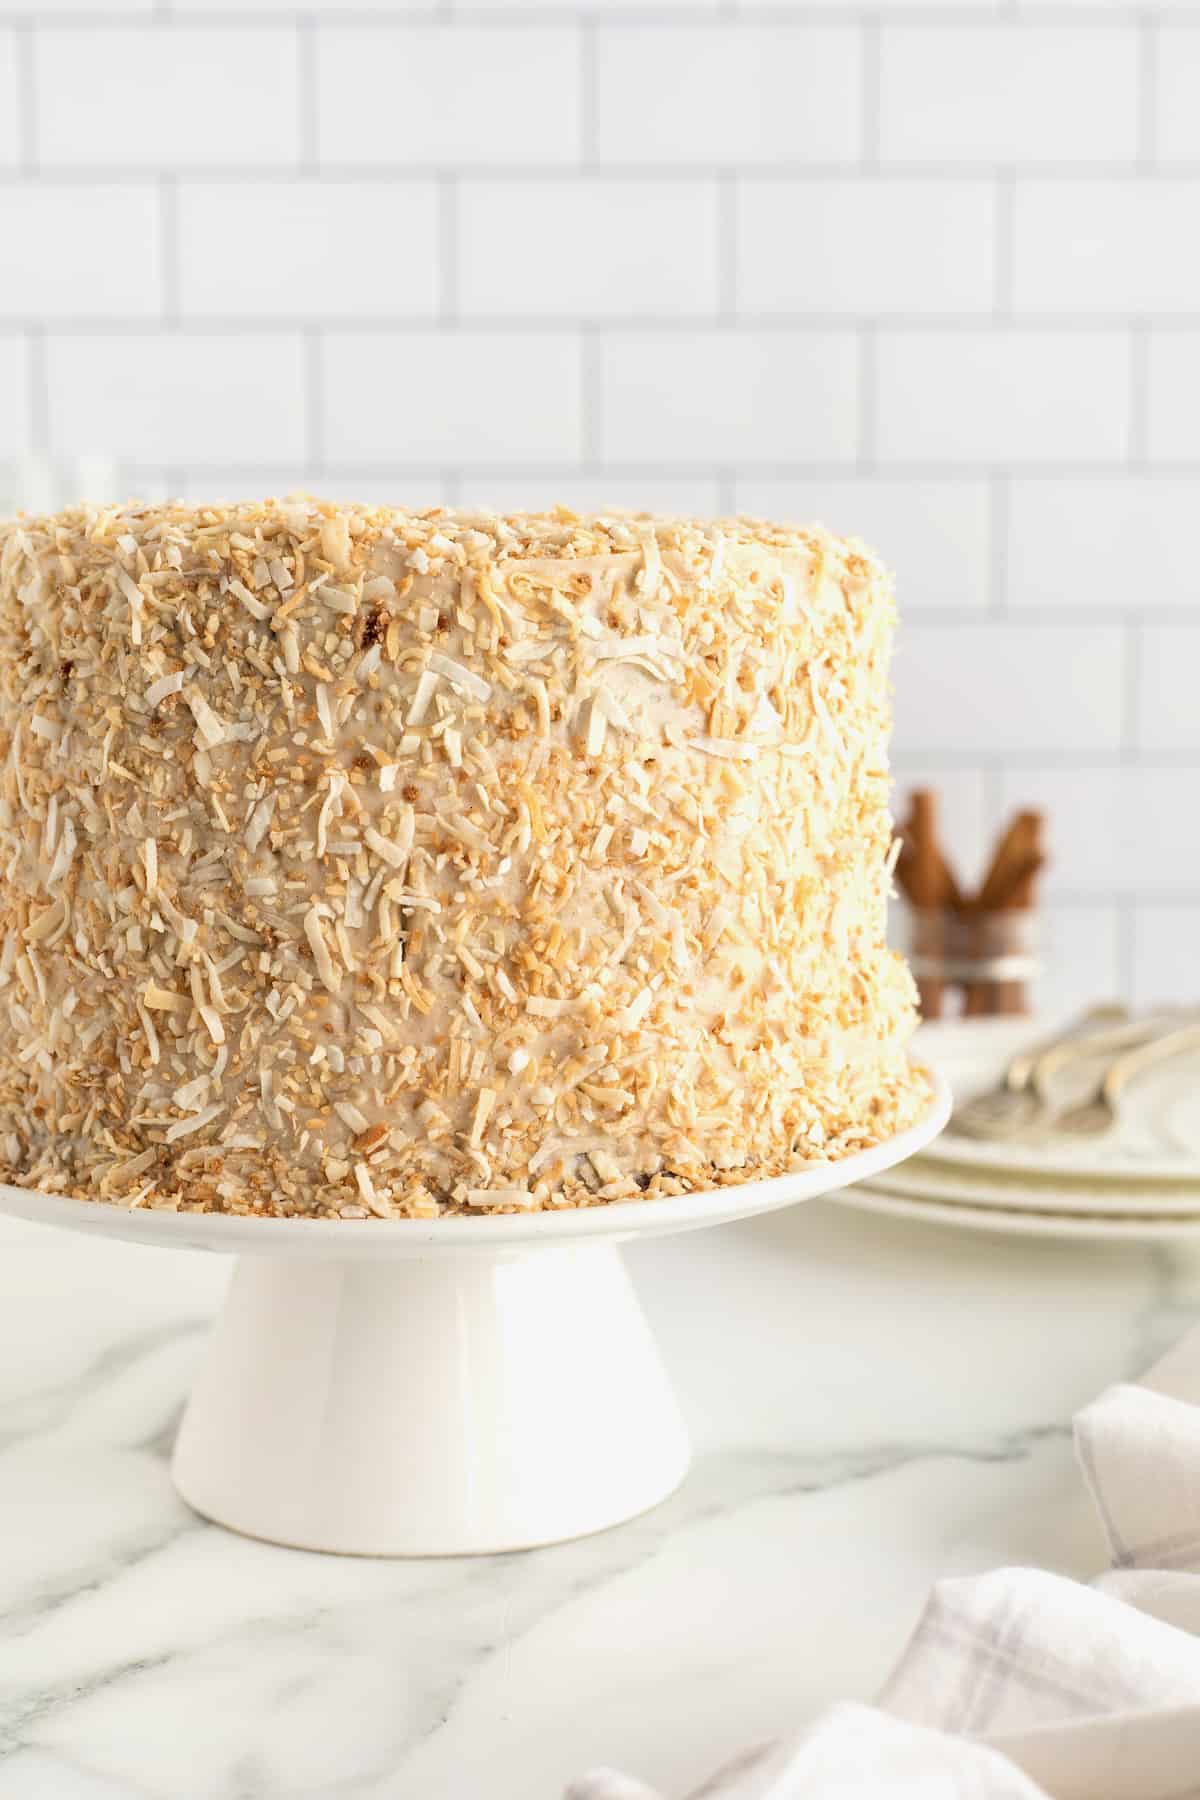 Coconut Carrot Cake with Cinnamon Cream Cheese Frosting by The BakerMama